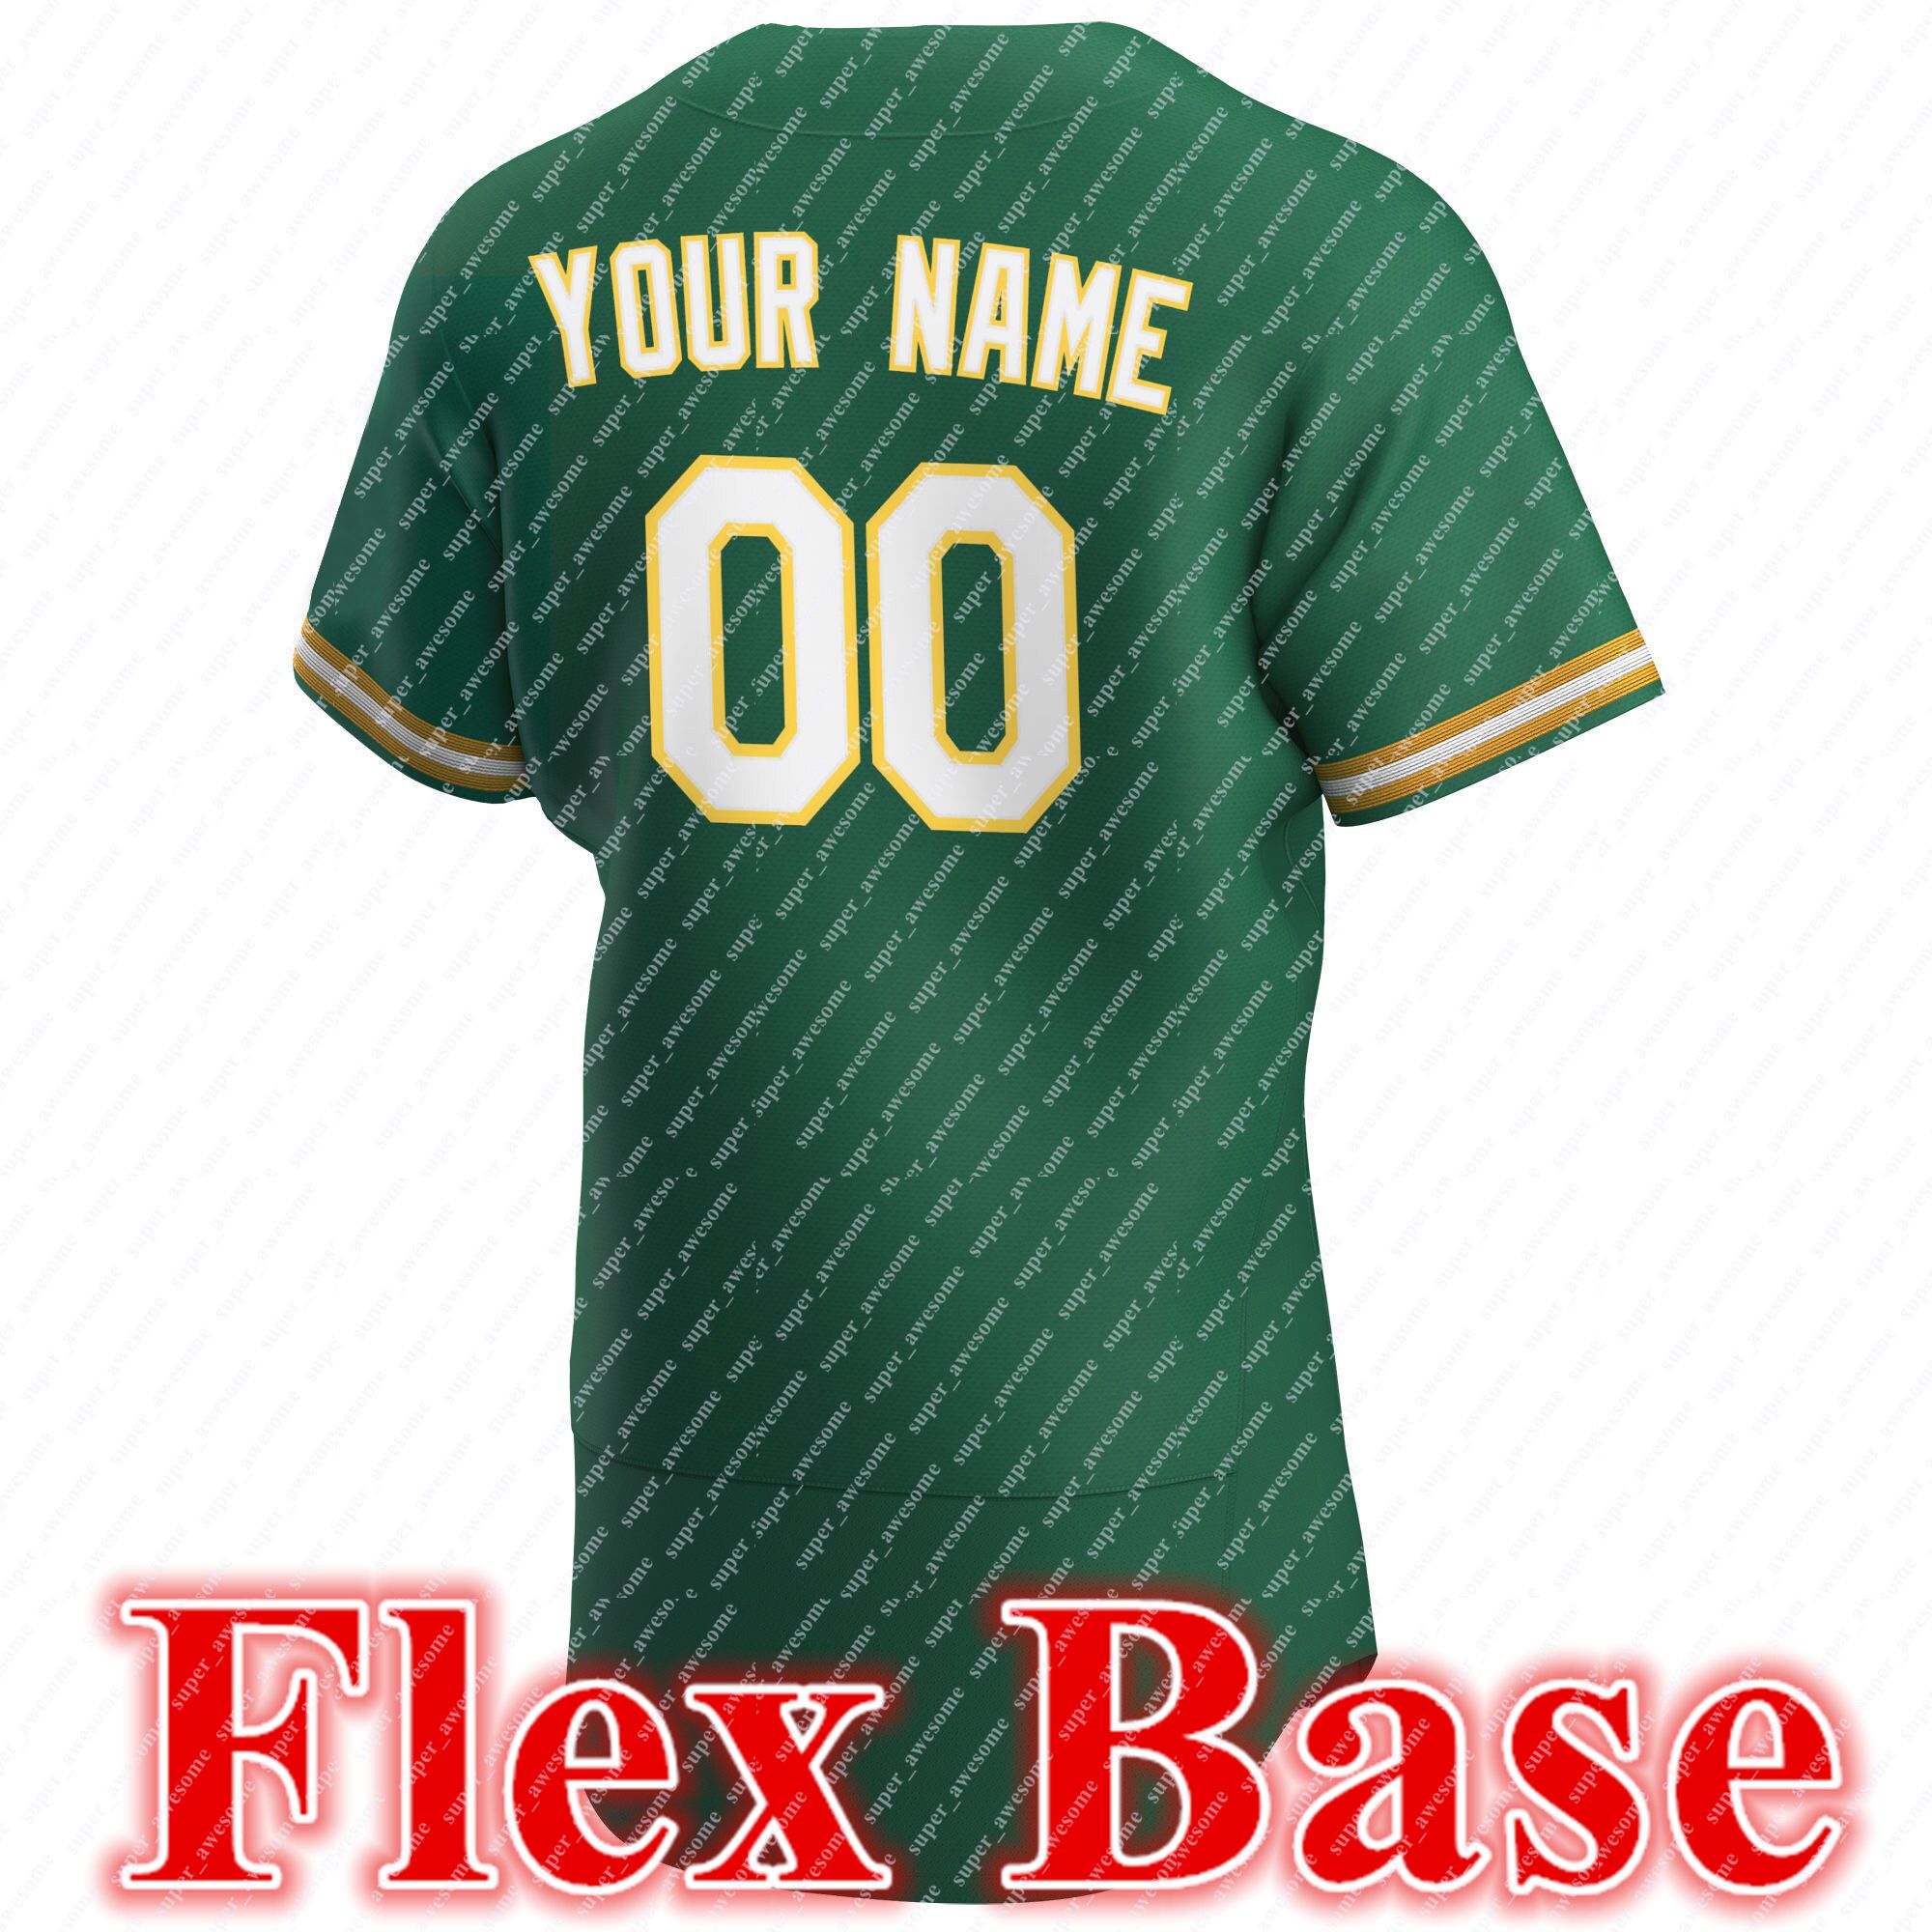 Kelly Green Flex Base With Sleeve Patch